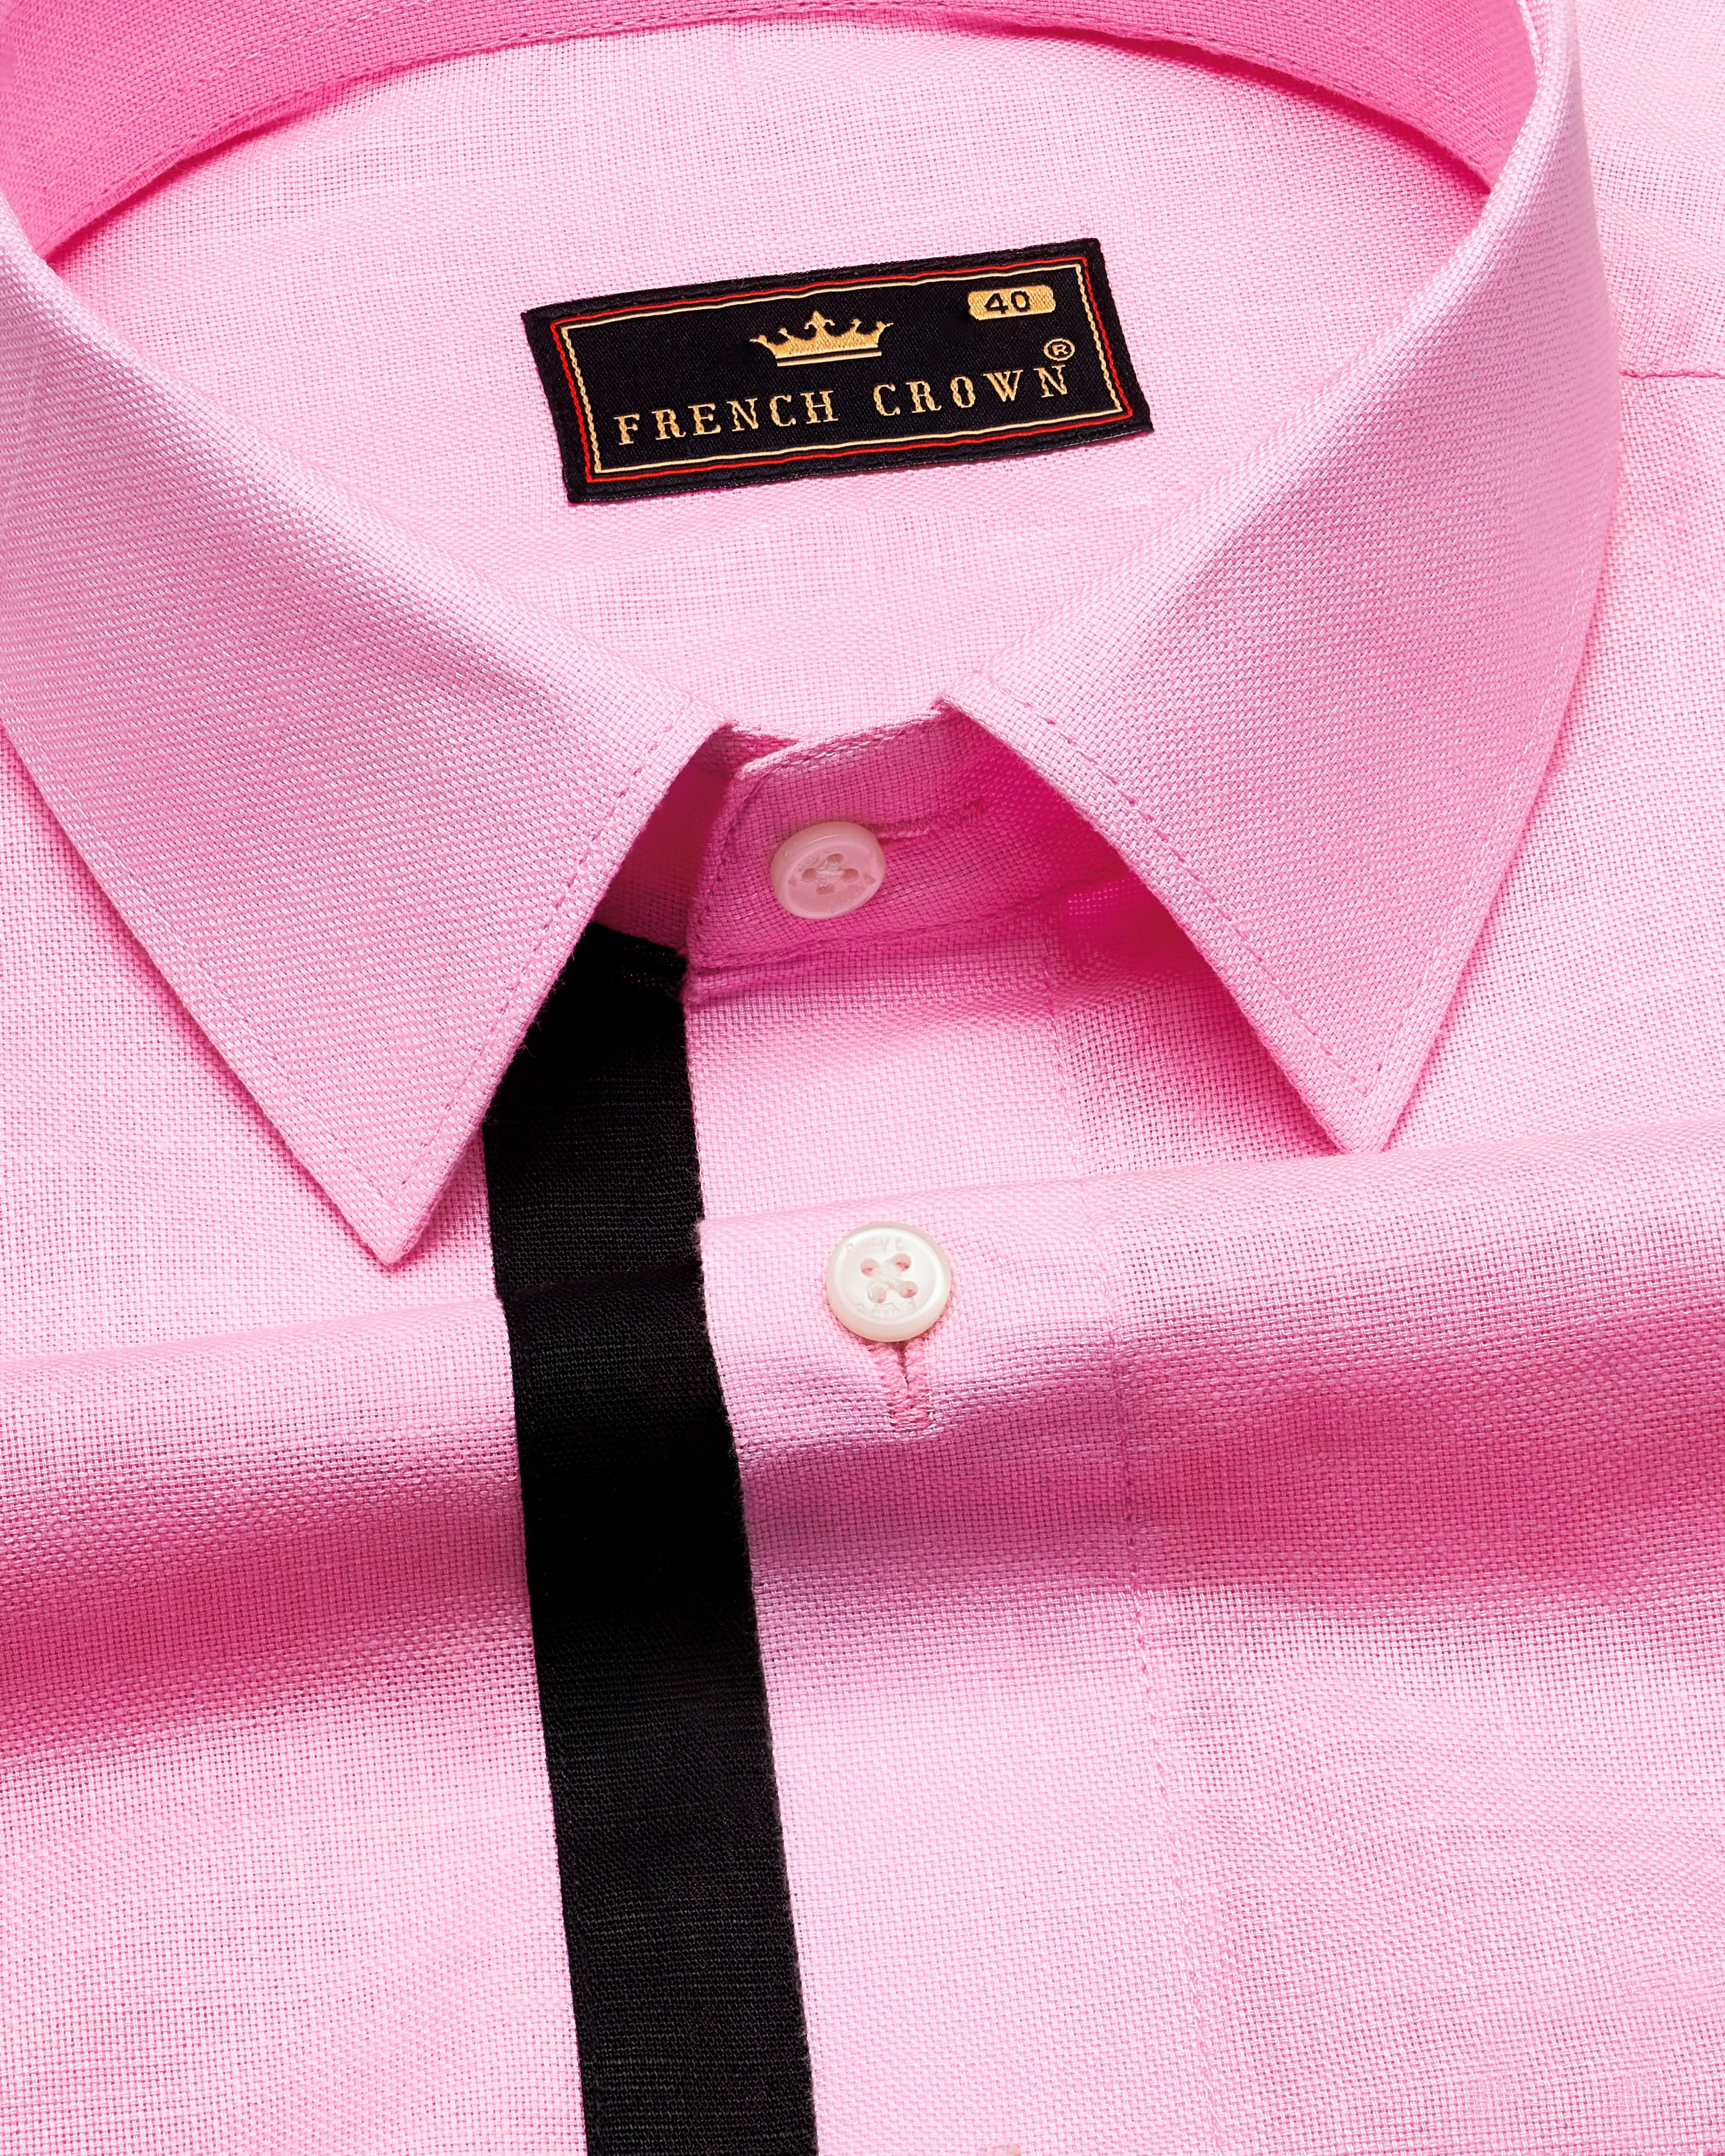 Cupid Pink with Black Patch Work Luxurious Linen Designer Shirt 9122-P455-38,9122-P455-H-38,9122-P455-39,9122-P455-H-39,9122-P455-40,9122-P455-H-40,9122-P455-42,9122-P455-H-42,9122-P455-44,9122-P455-H-44,9122-P455-46,9122-P455-H-46,9122-P455-48,9122-P455-H-48,9122-P455-50,9122-P455-H-50,9122-P455-52,9122-P455-H-52